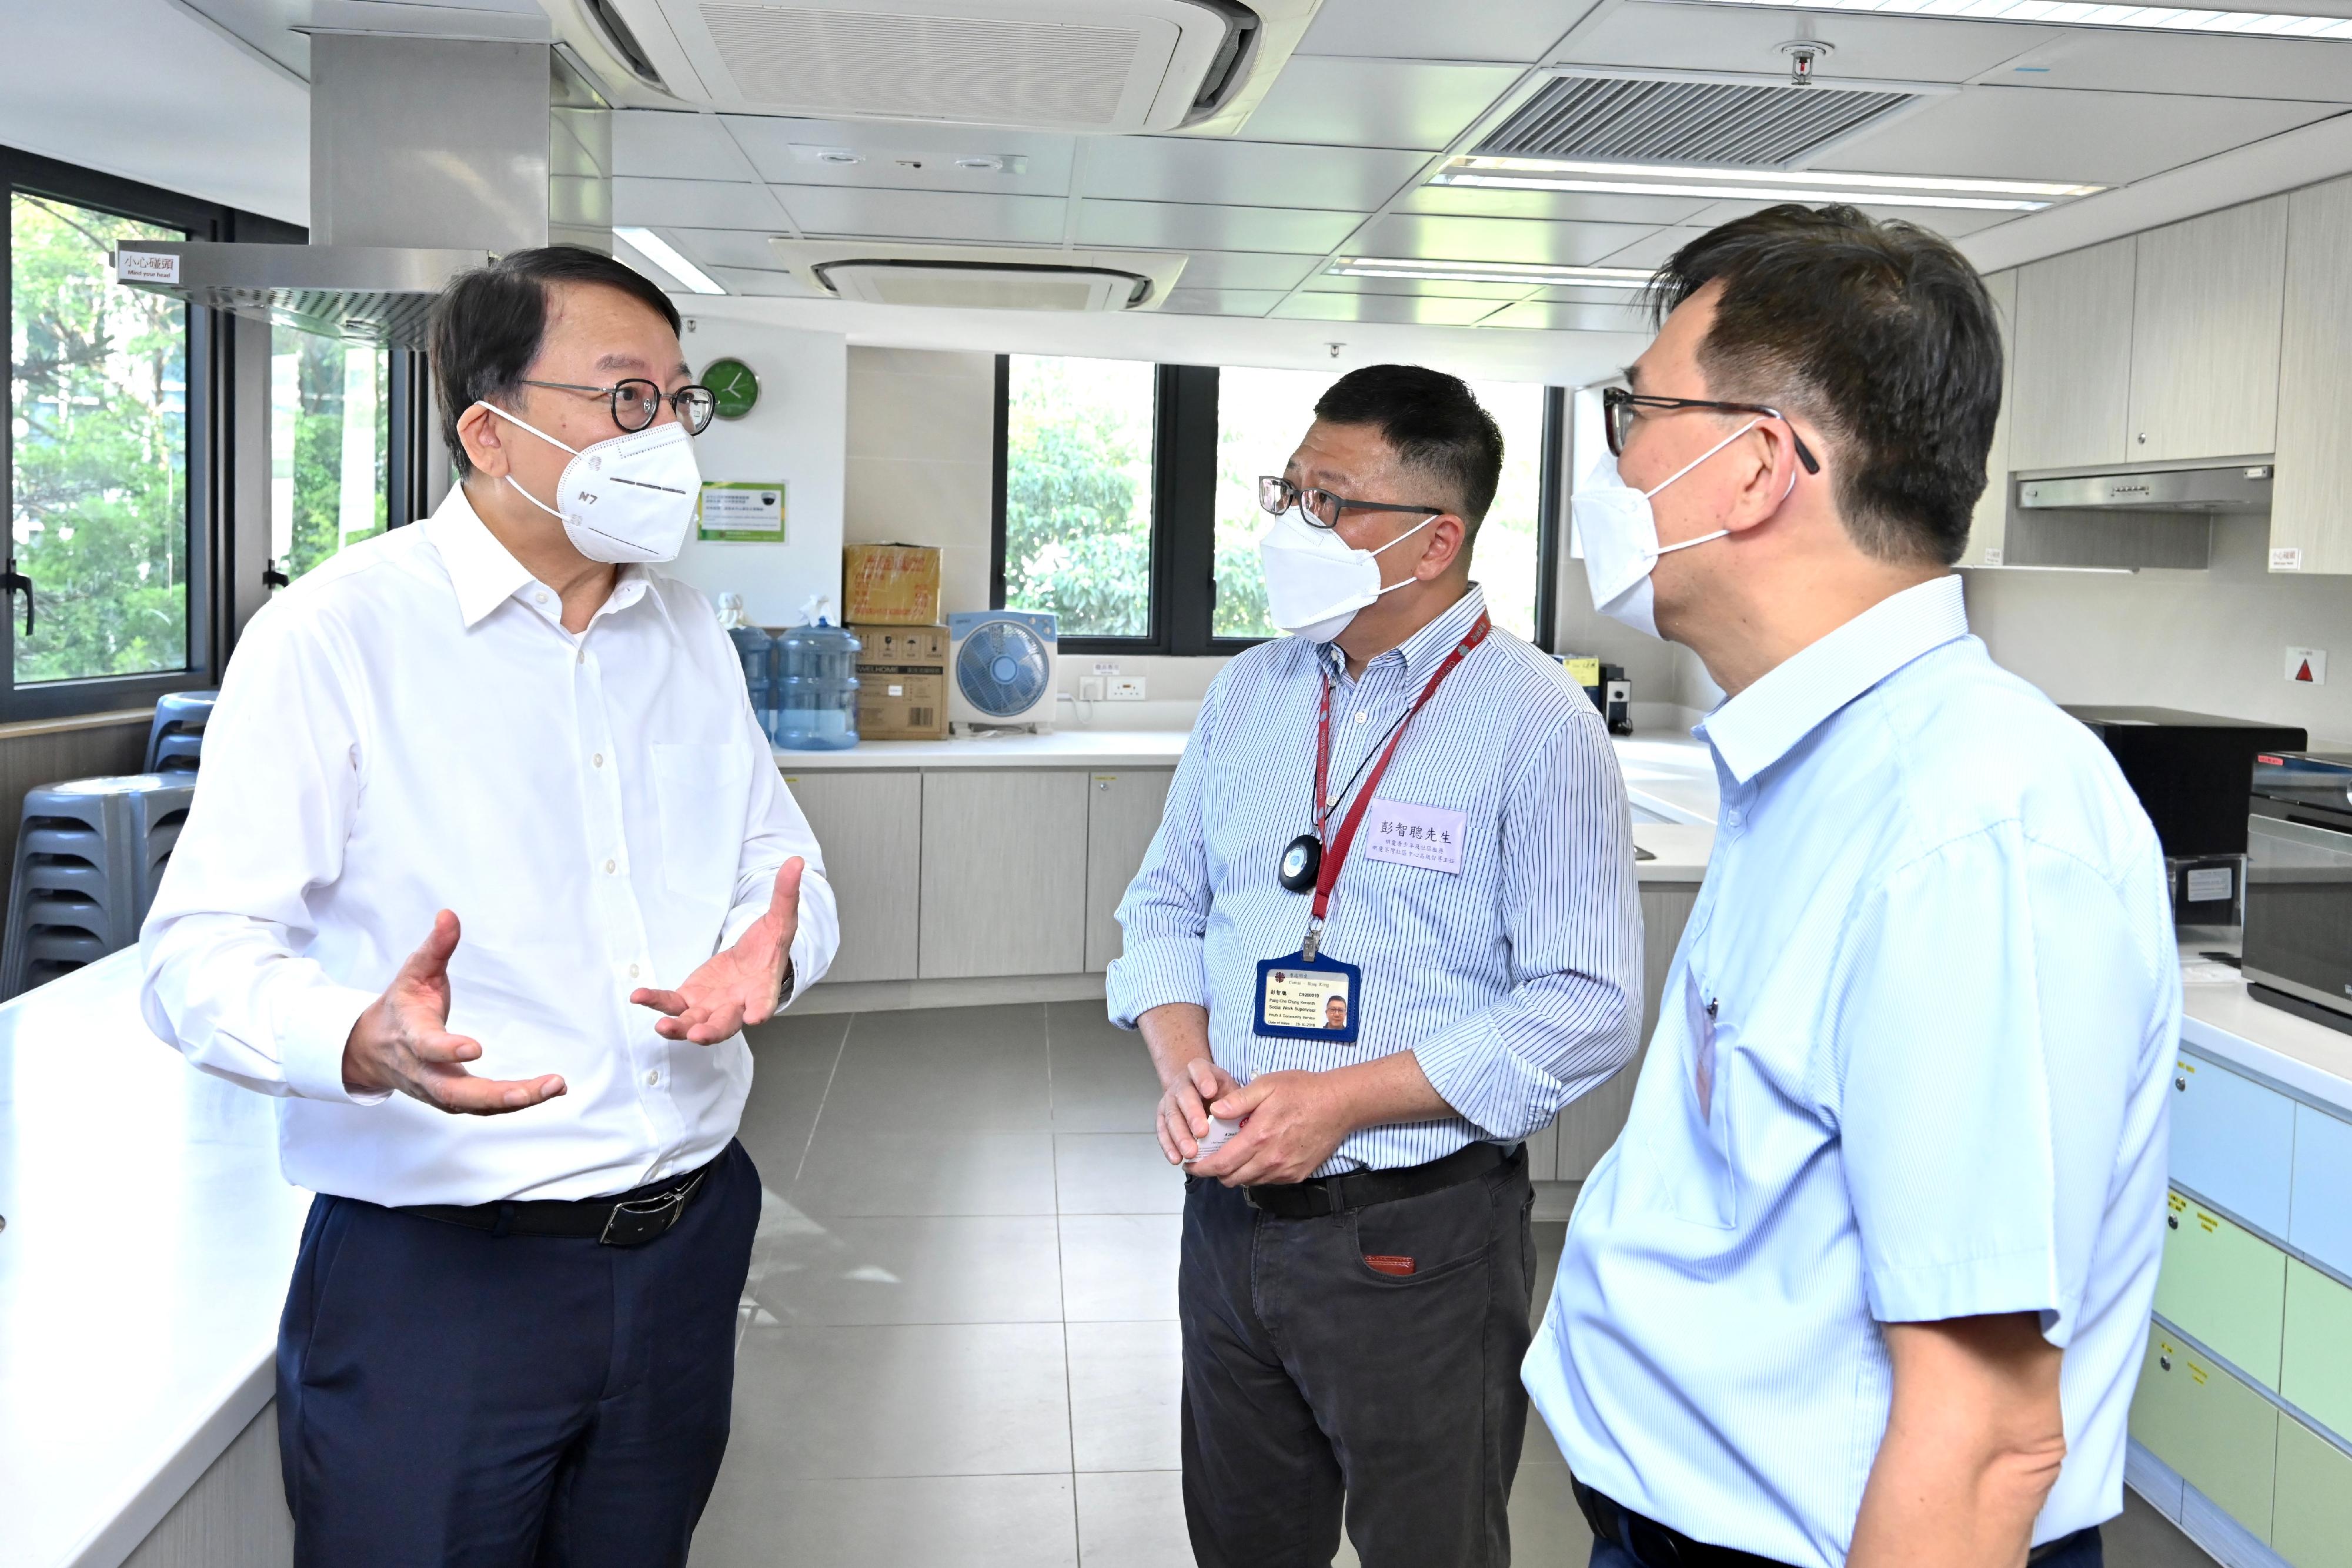 The Chief Secretary for Administration, Mr Chan Kwok-ki (first left), visited Caritas Community Centre - Tsuen Wan today (July 26) to learn from Caritas - Hong Kong representatives about the various facilities and services provided by the centre for grassroots families. They were in the kitchen of the centre.